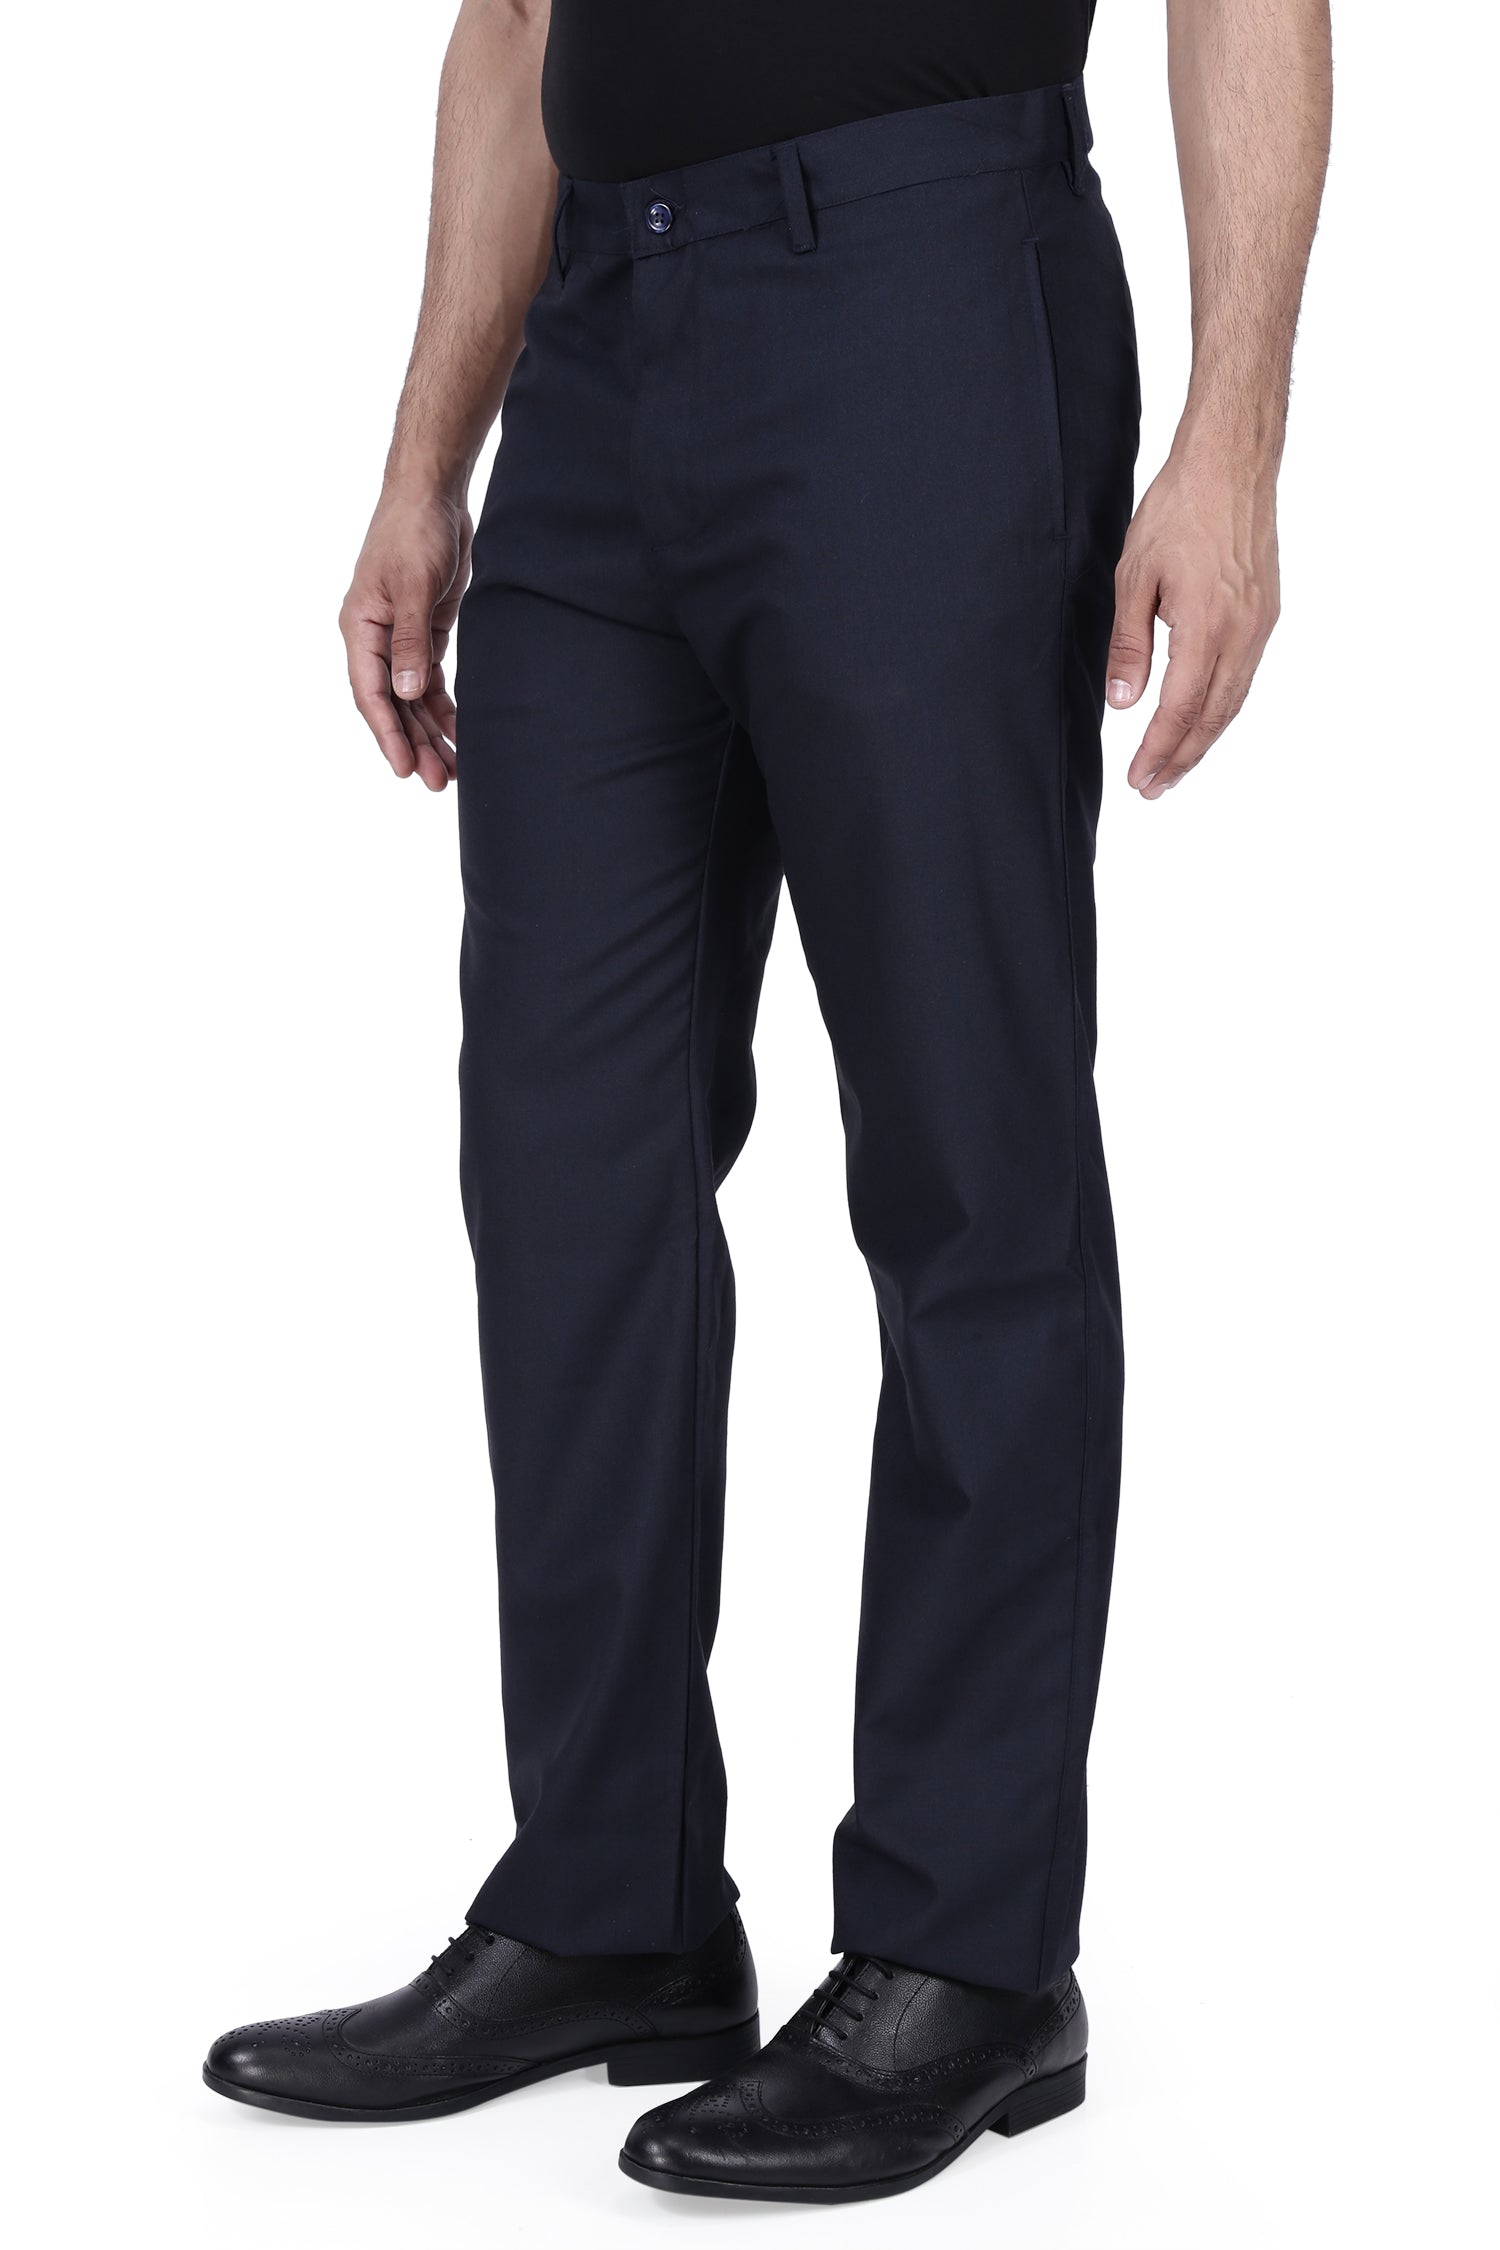 Buy Blue Trousers for Men, Navy Blue Trousers Online: SELECTED HOMME